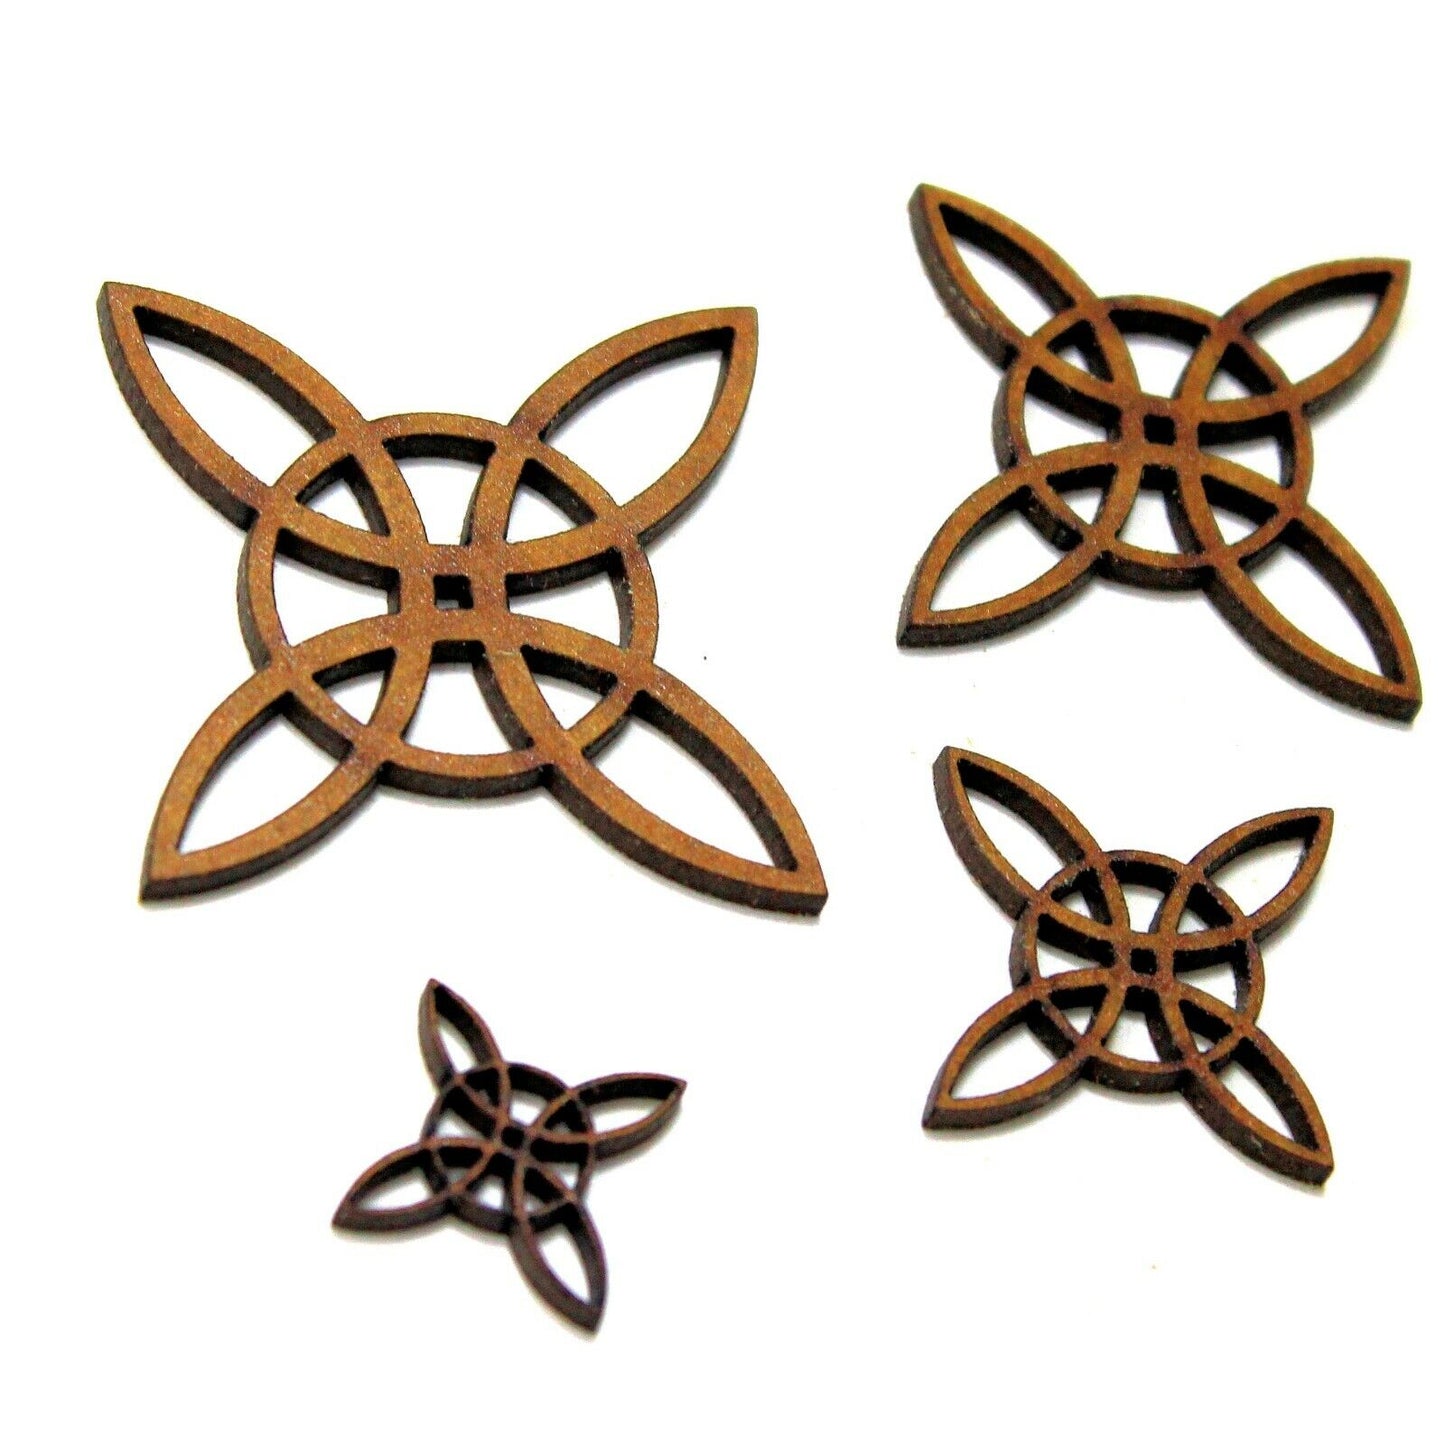 Witch's Knot Wicca Symbol Craft Shape Blank, Various Sizes, 2mm MDF Wood. Pagan